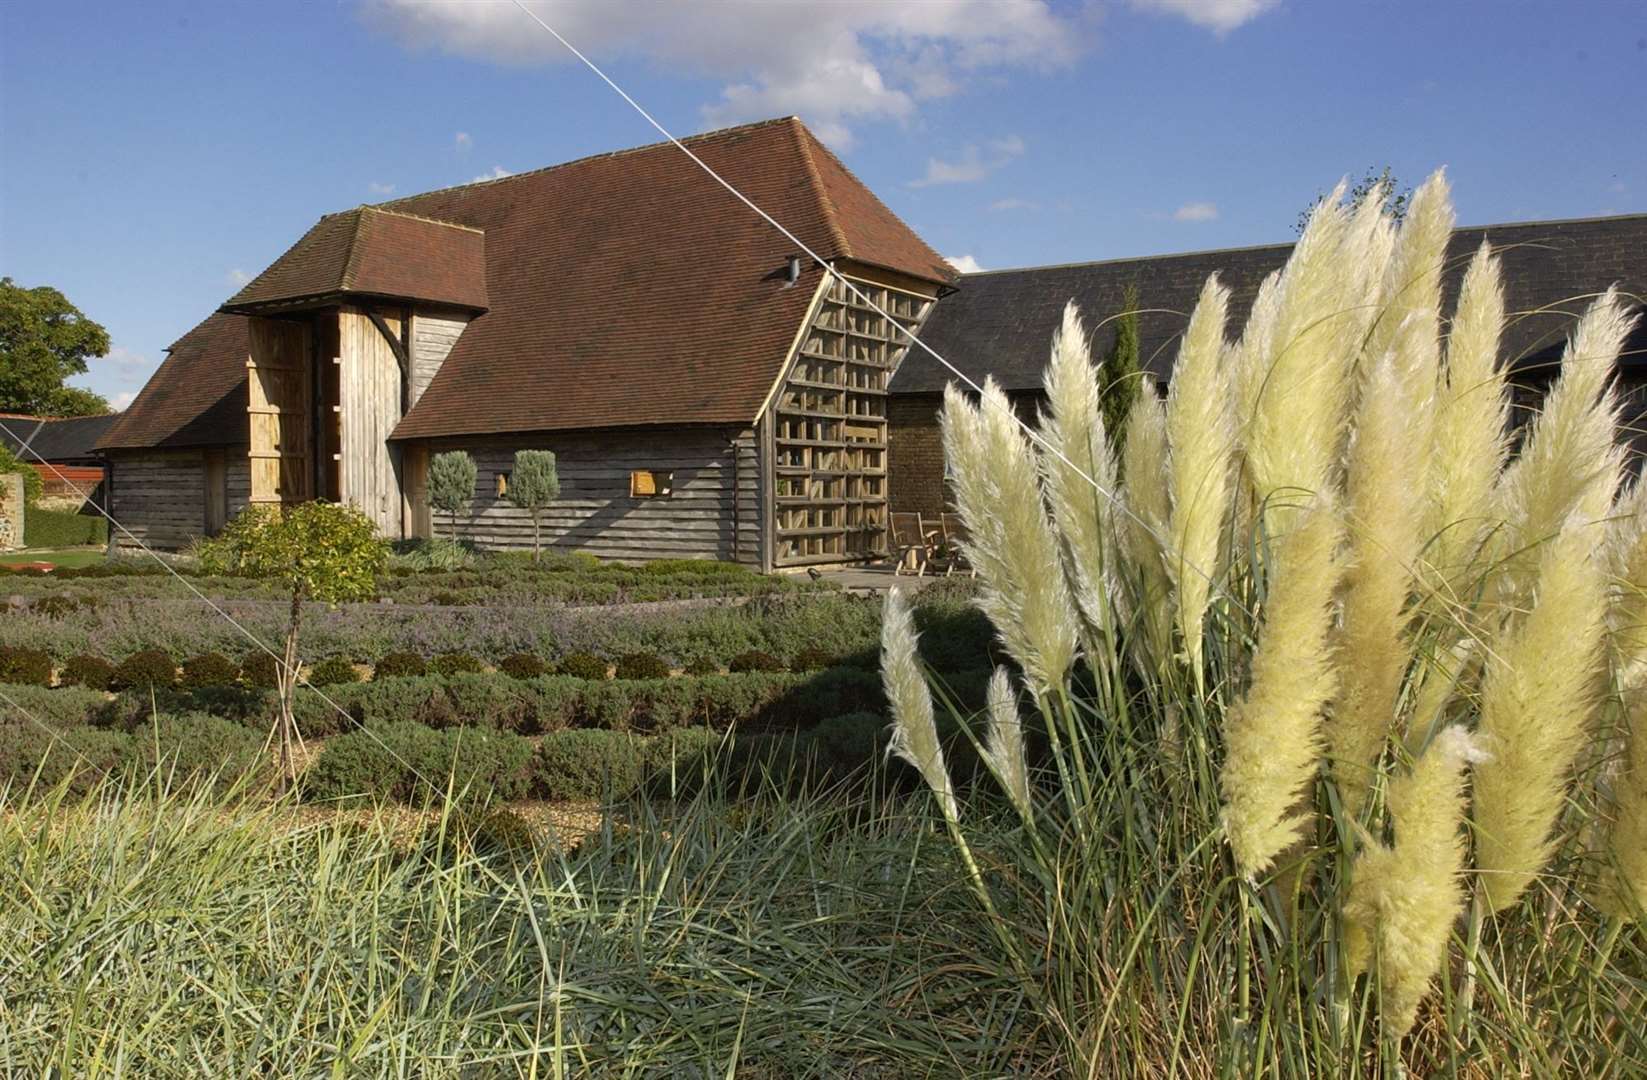 You could visit Pheasant Barn at Oare if you book online